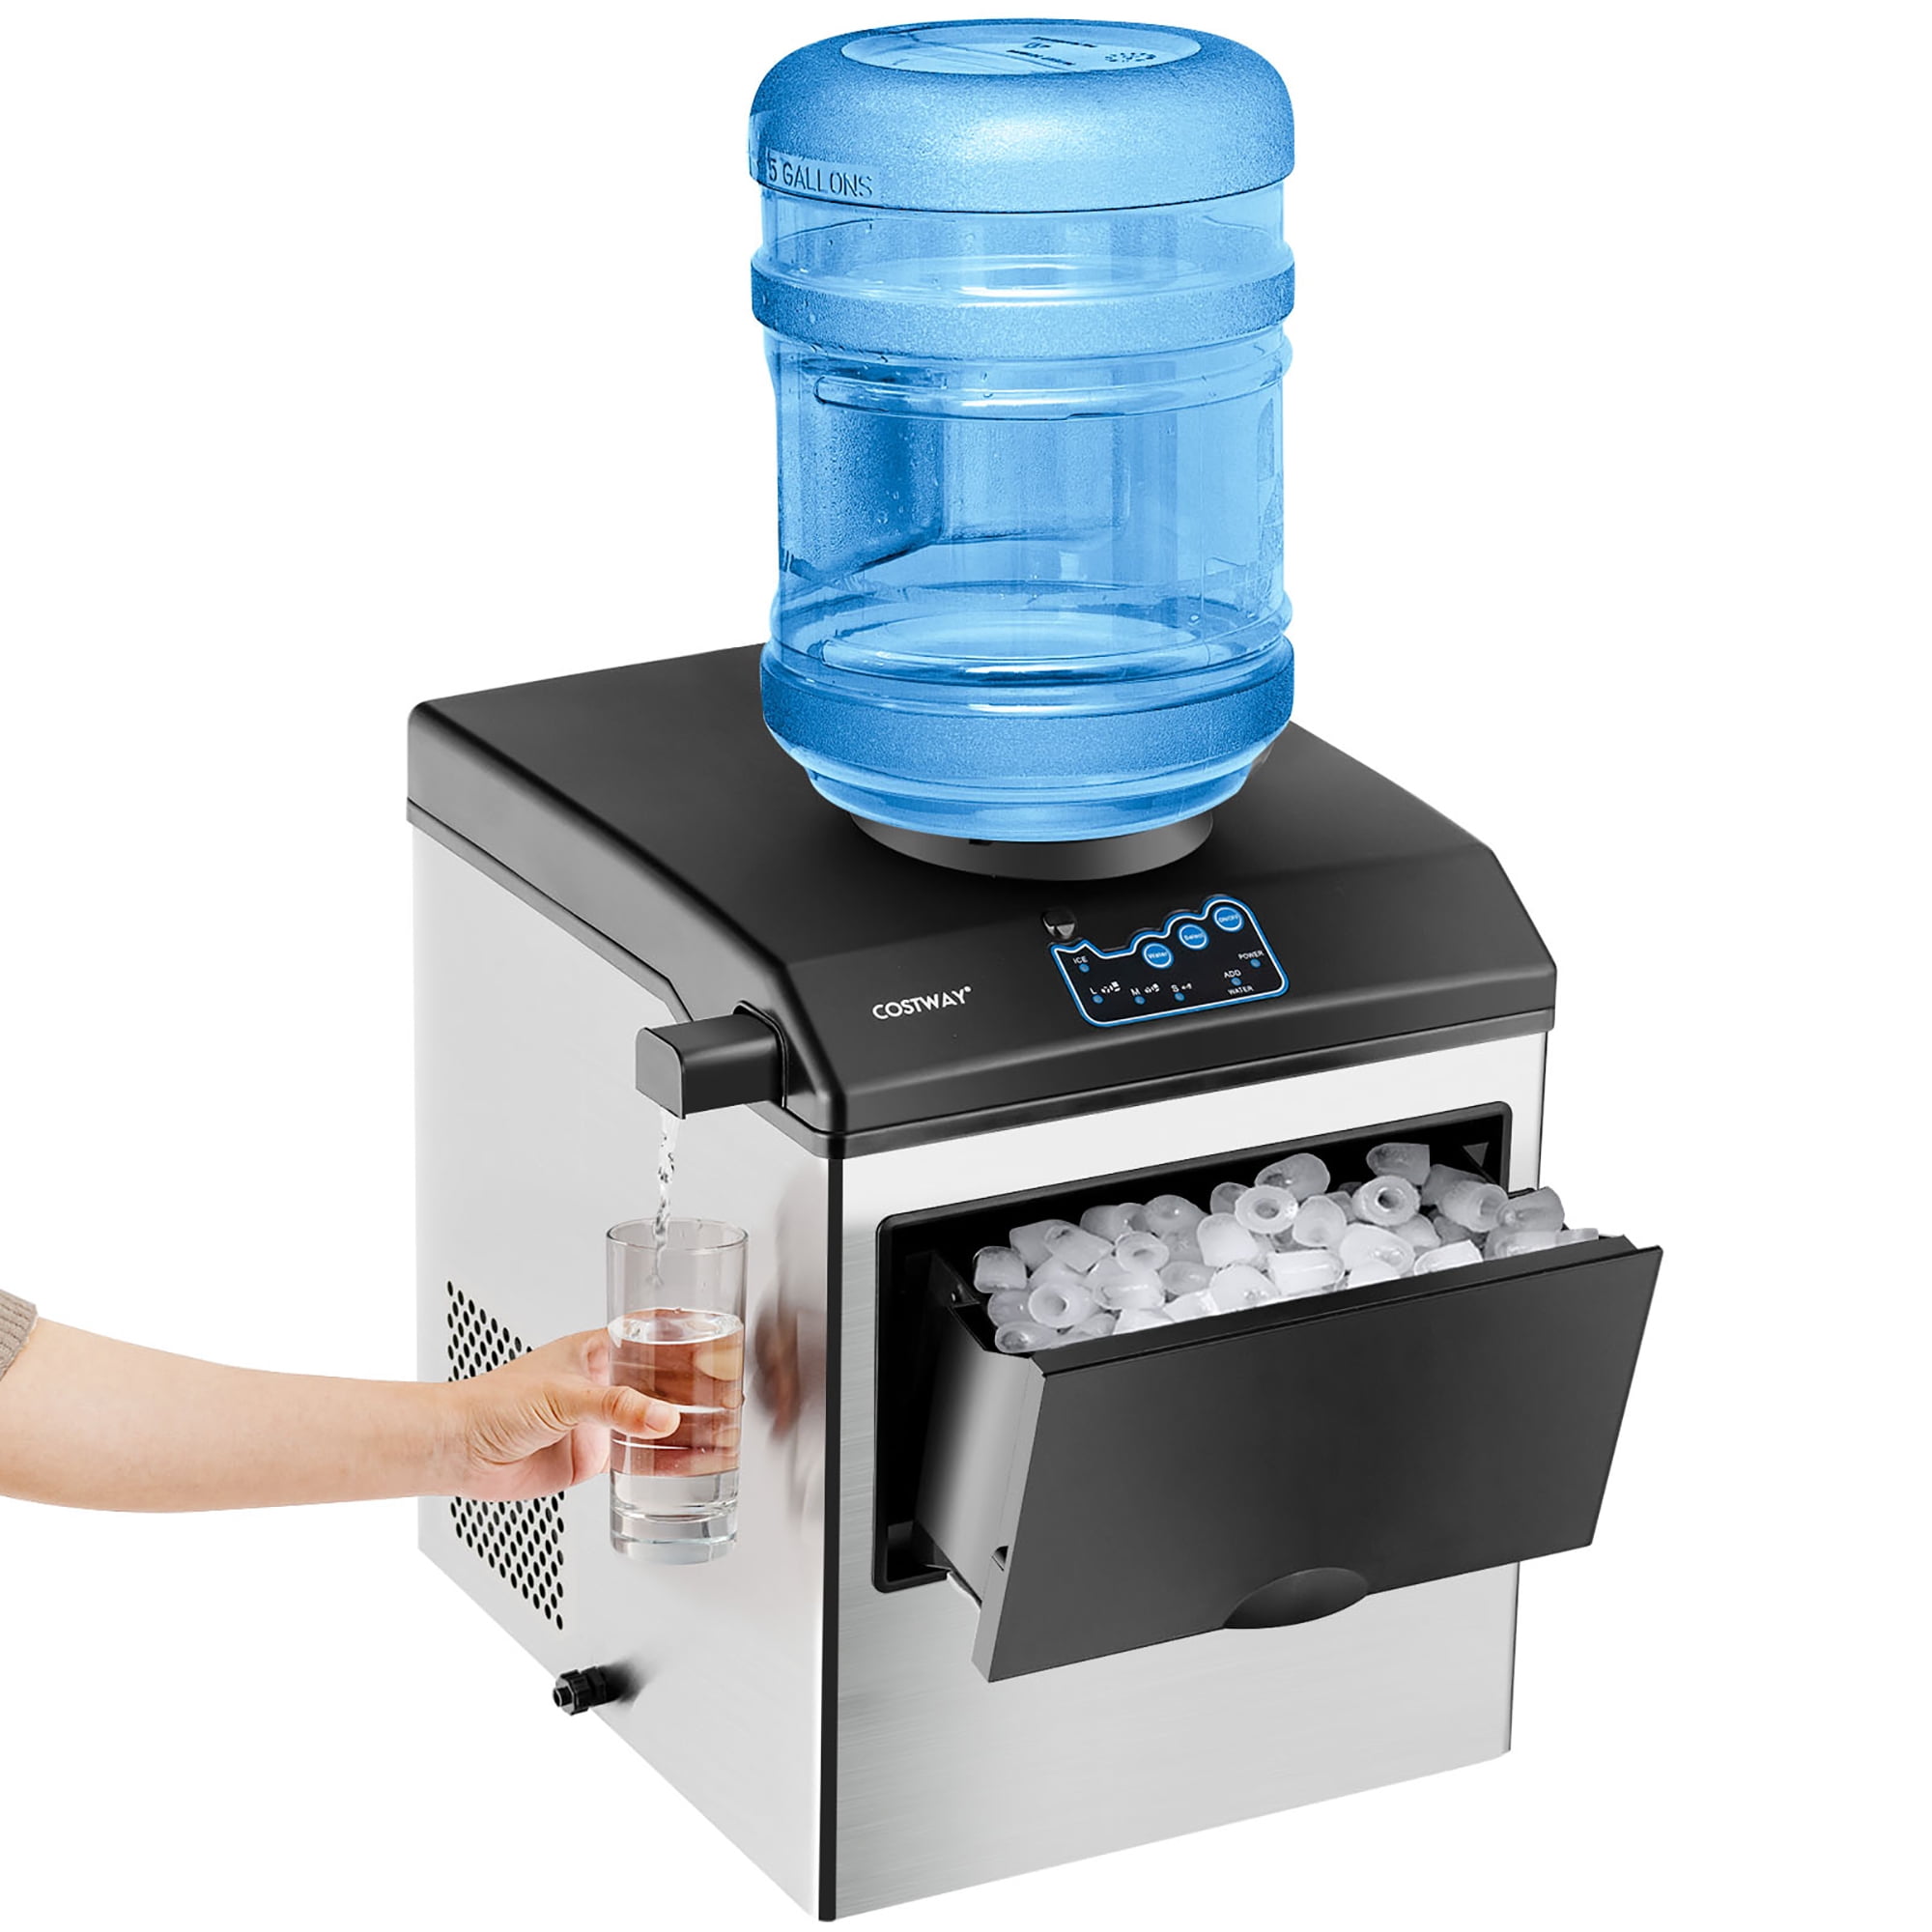 Osoeri Countertop Nugget Ice Maker, Pebble Ice Maker Machine, 30lbs Per  Day, 2 Ways Water Refill, 3Qt Water Reservoir & Self-Cleaning, Stainless  Steel